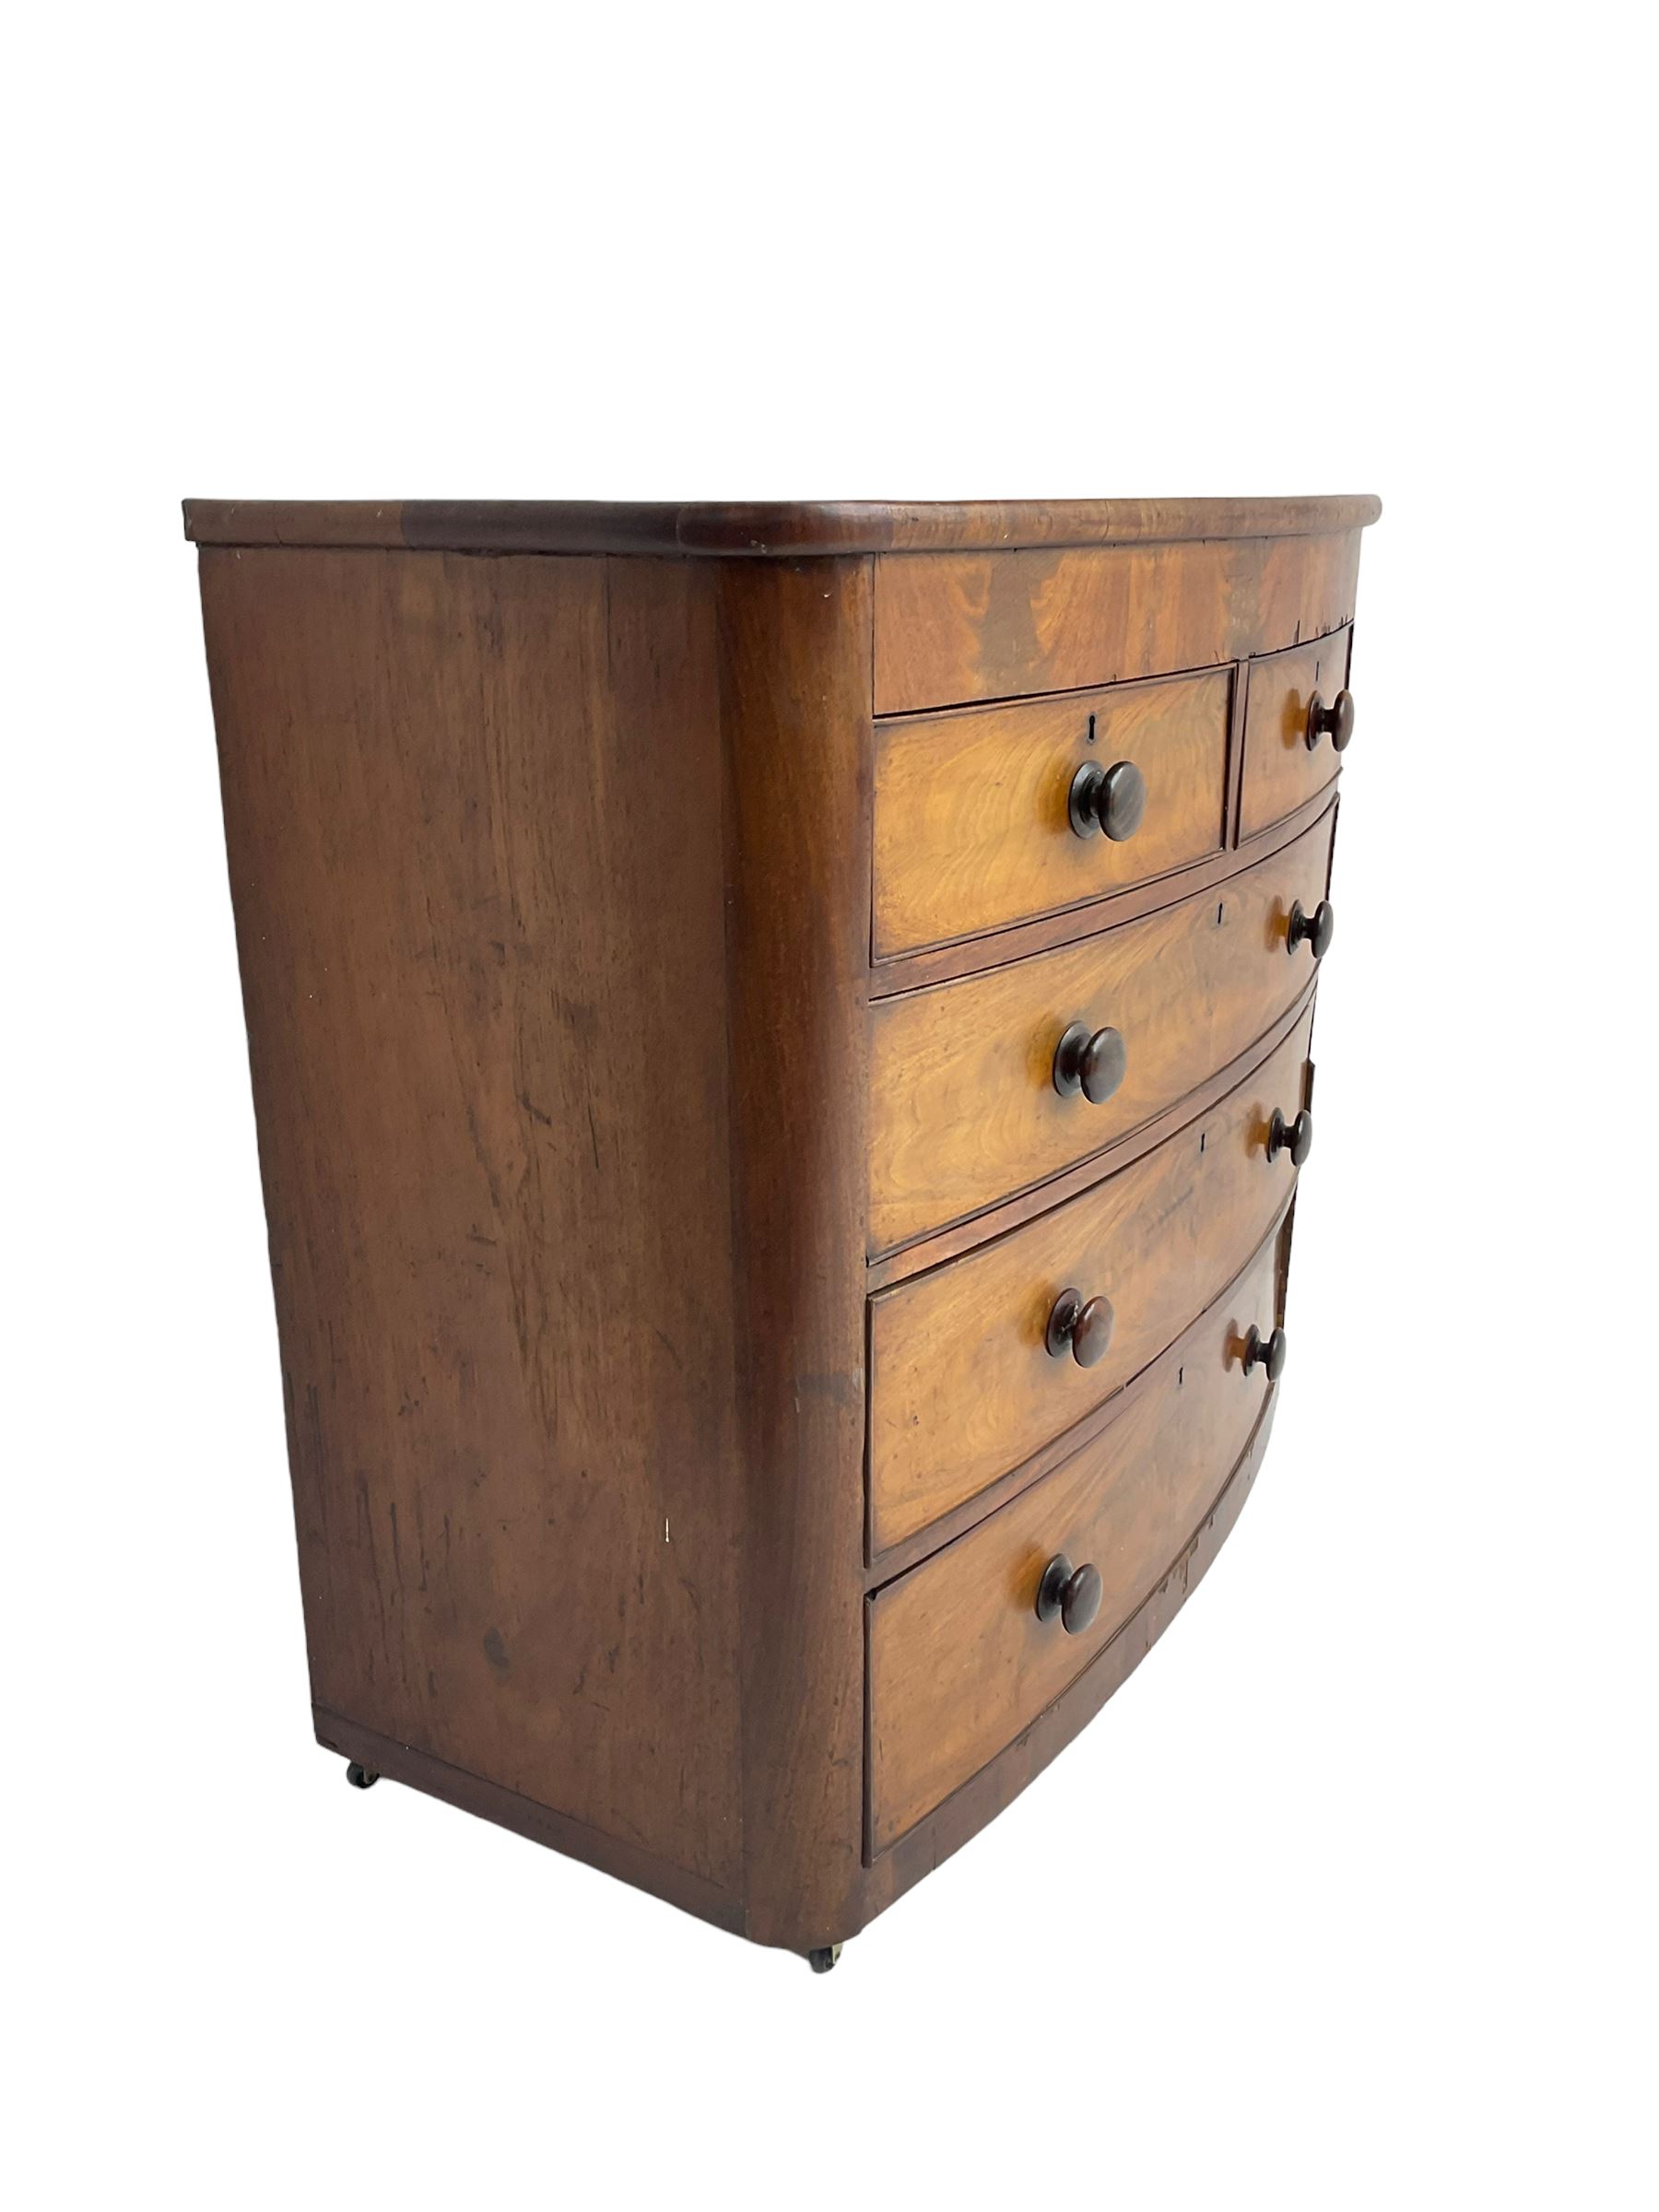 Late 19th century mahogany bow front chest - Image 2 of 7